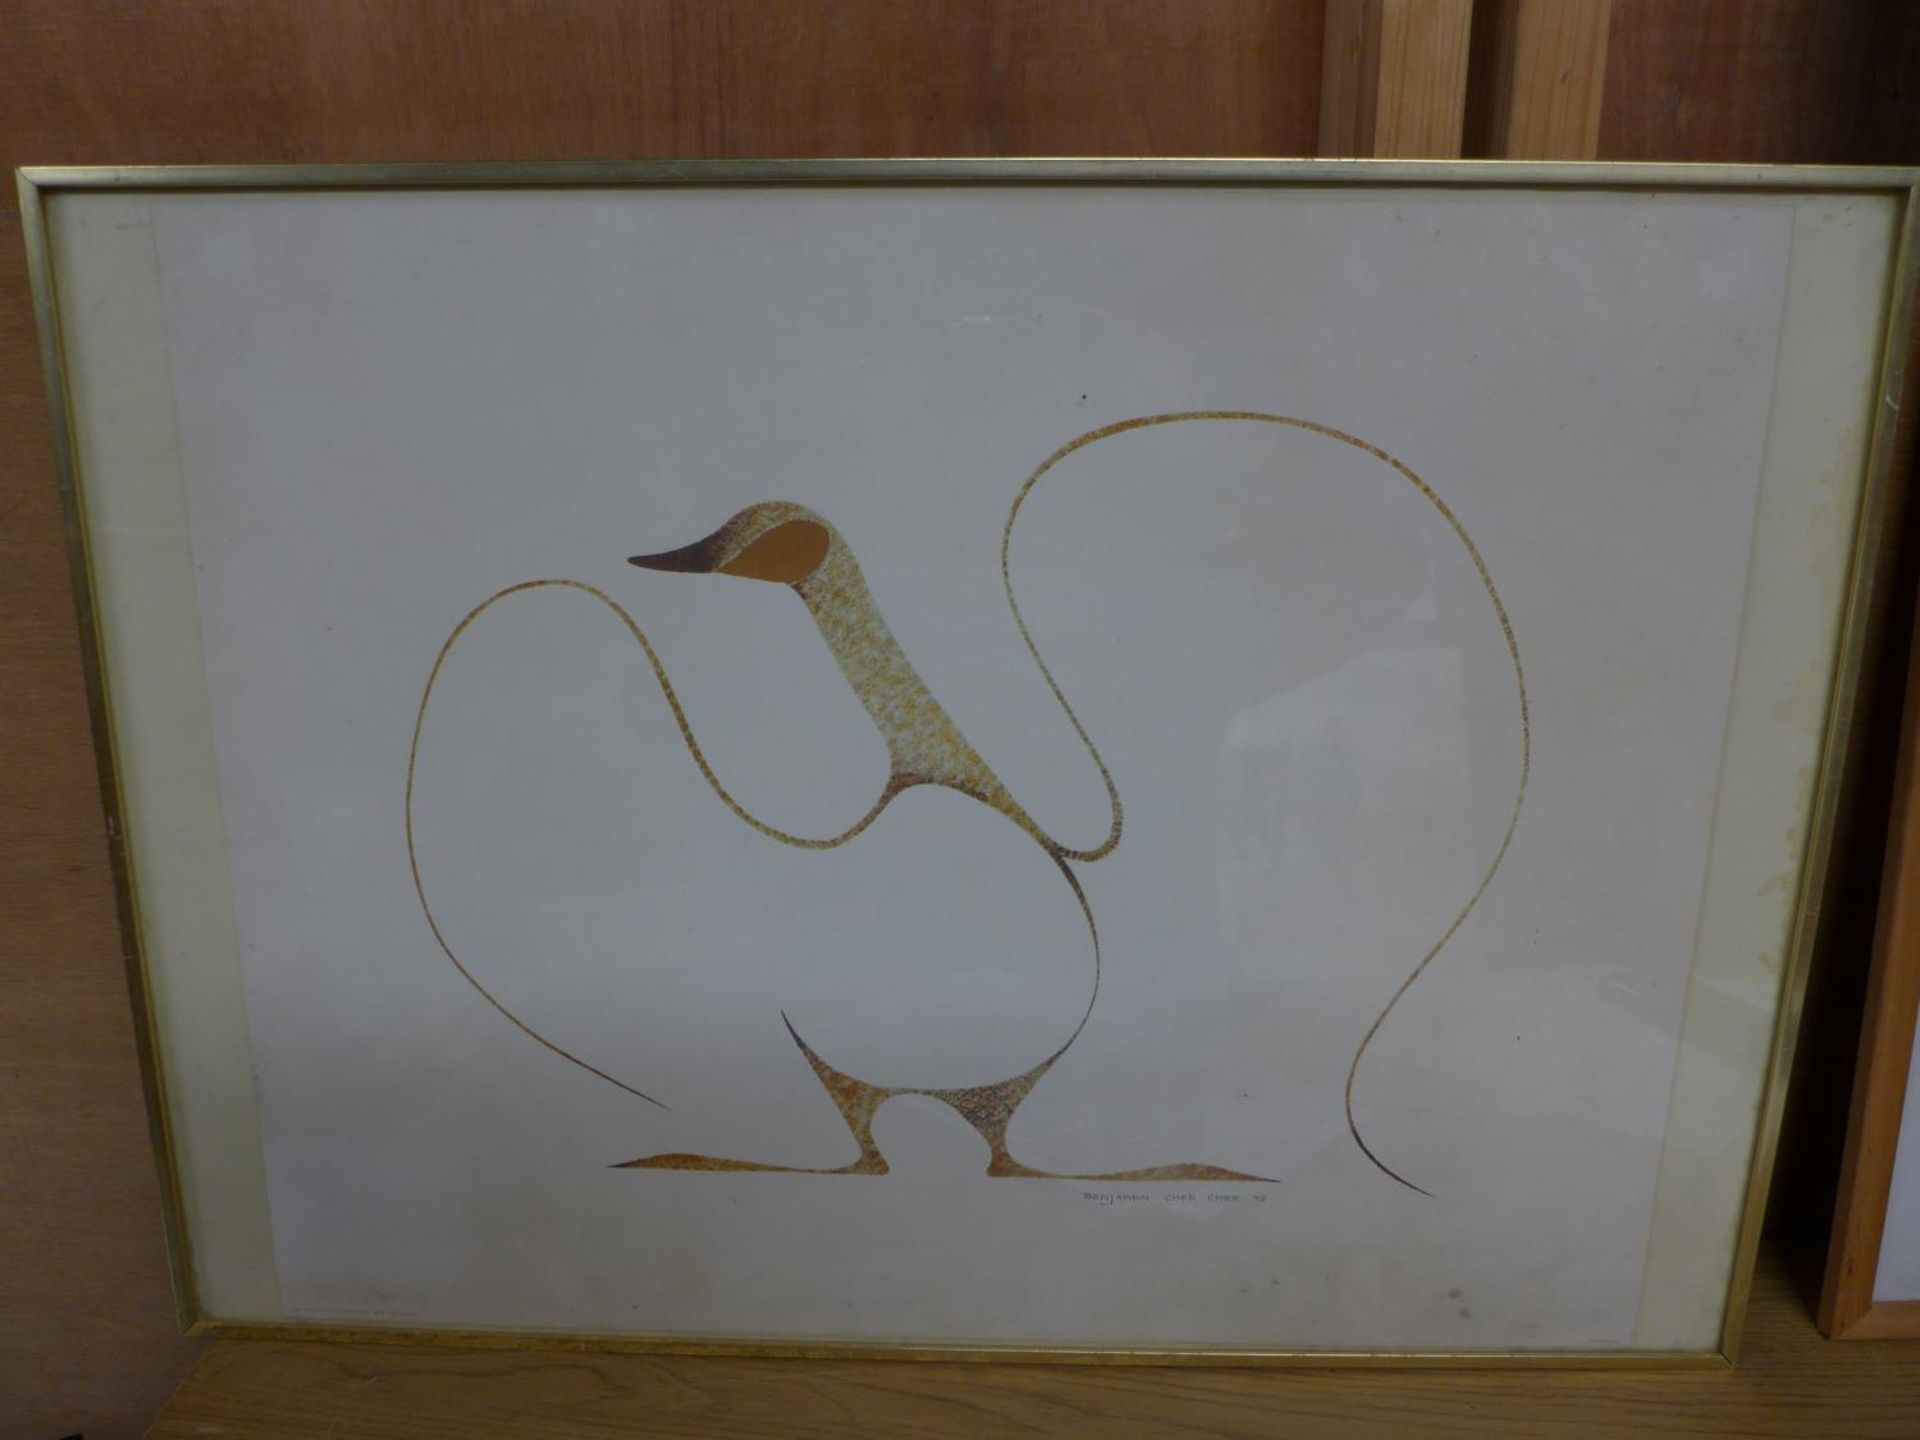 BENJAMIN CHEE CHEE (CARADIAN 1944-1977) 'DANCING GOOSE', COLOURED PRINT DATED 75, 49X61CM, FRAMED